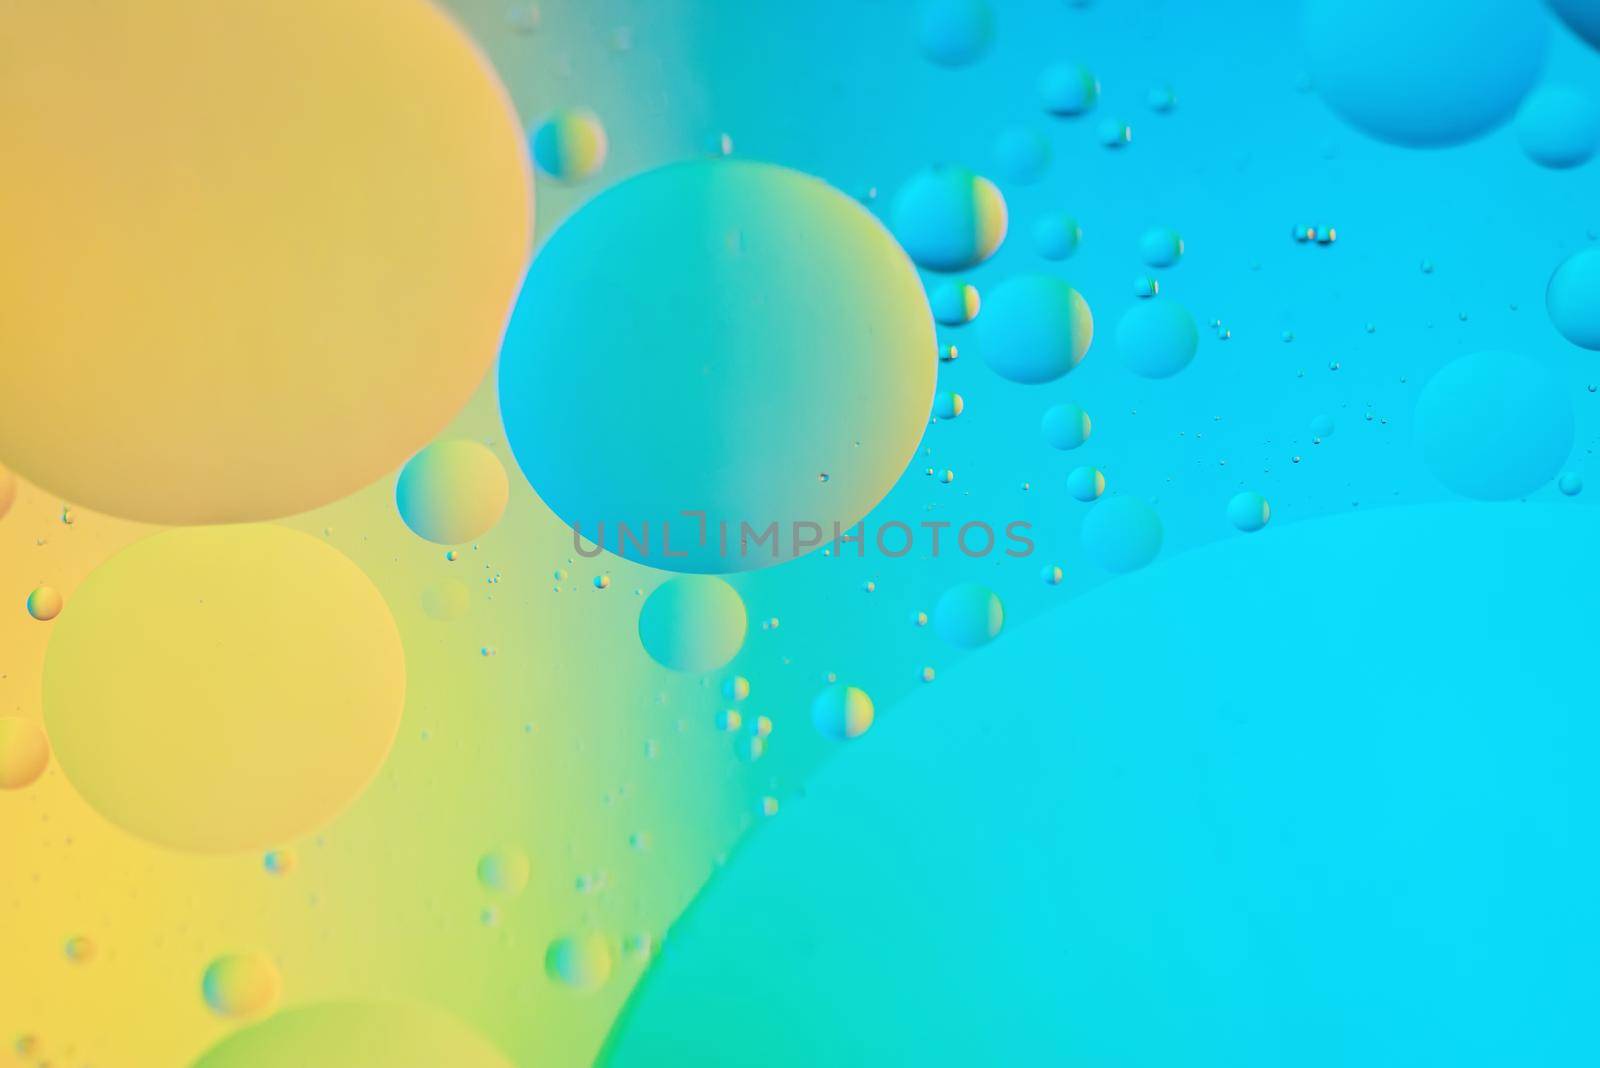 Oil drops in water. Abstract defocused psychedelic pattern image blue and yellow colored. Abstract background with colorful gradient colors. DOF.